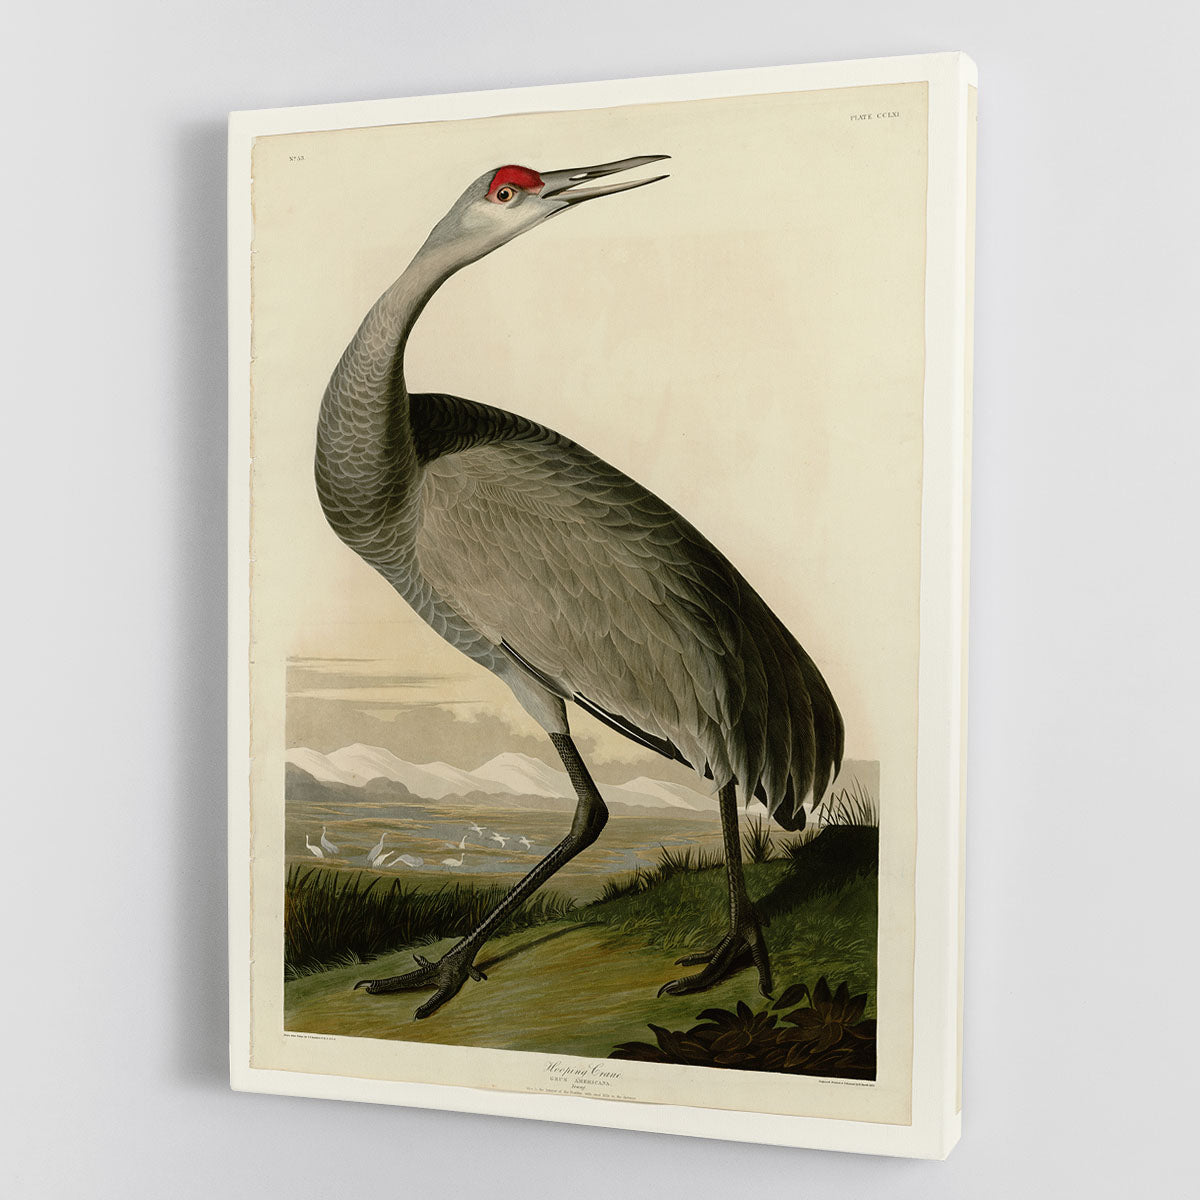 Whooping Crane by Audubon Canvas Print or Poster - Canvas Art Rocks - 1